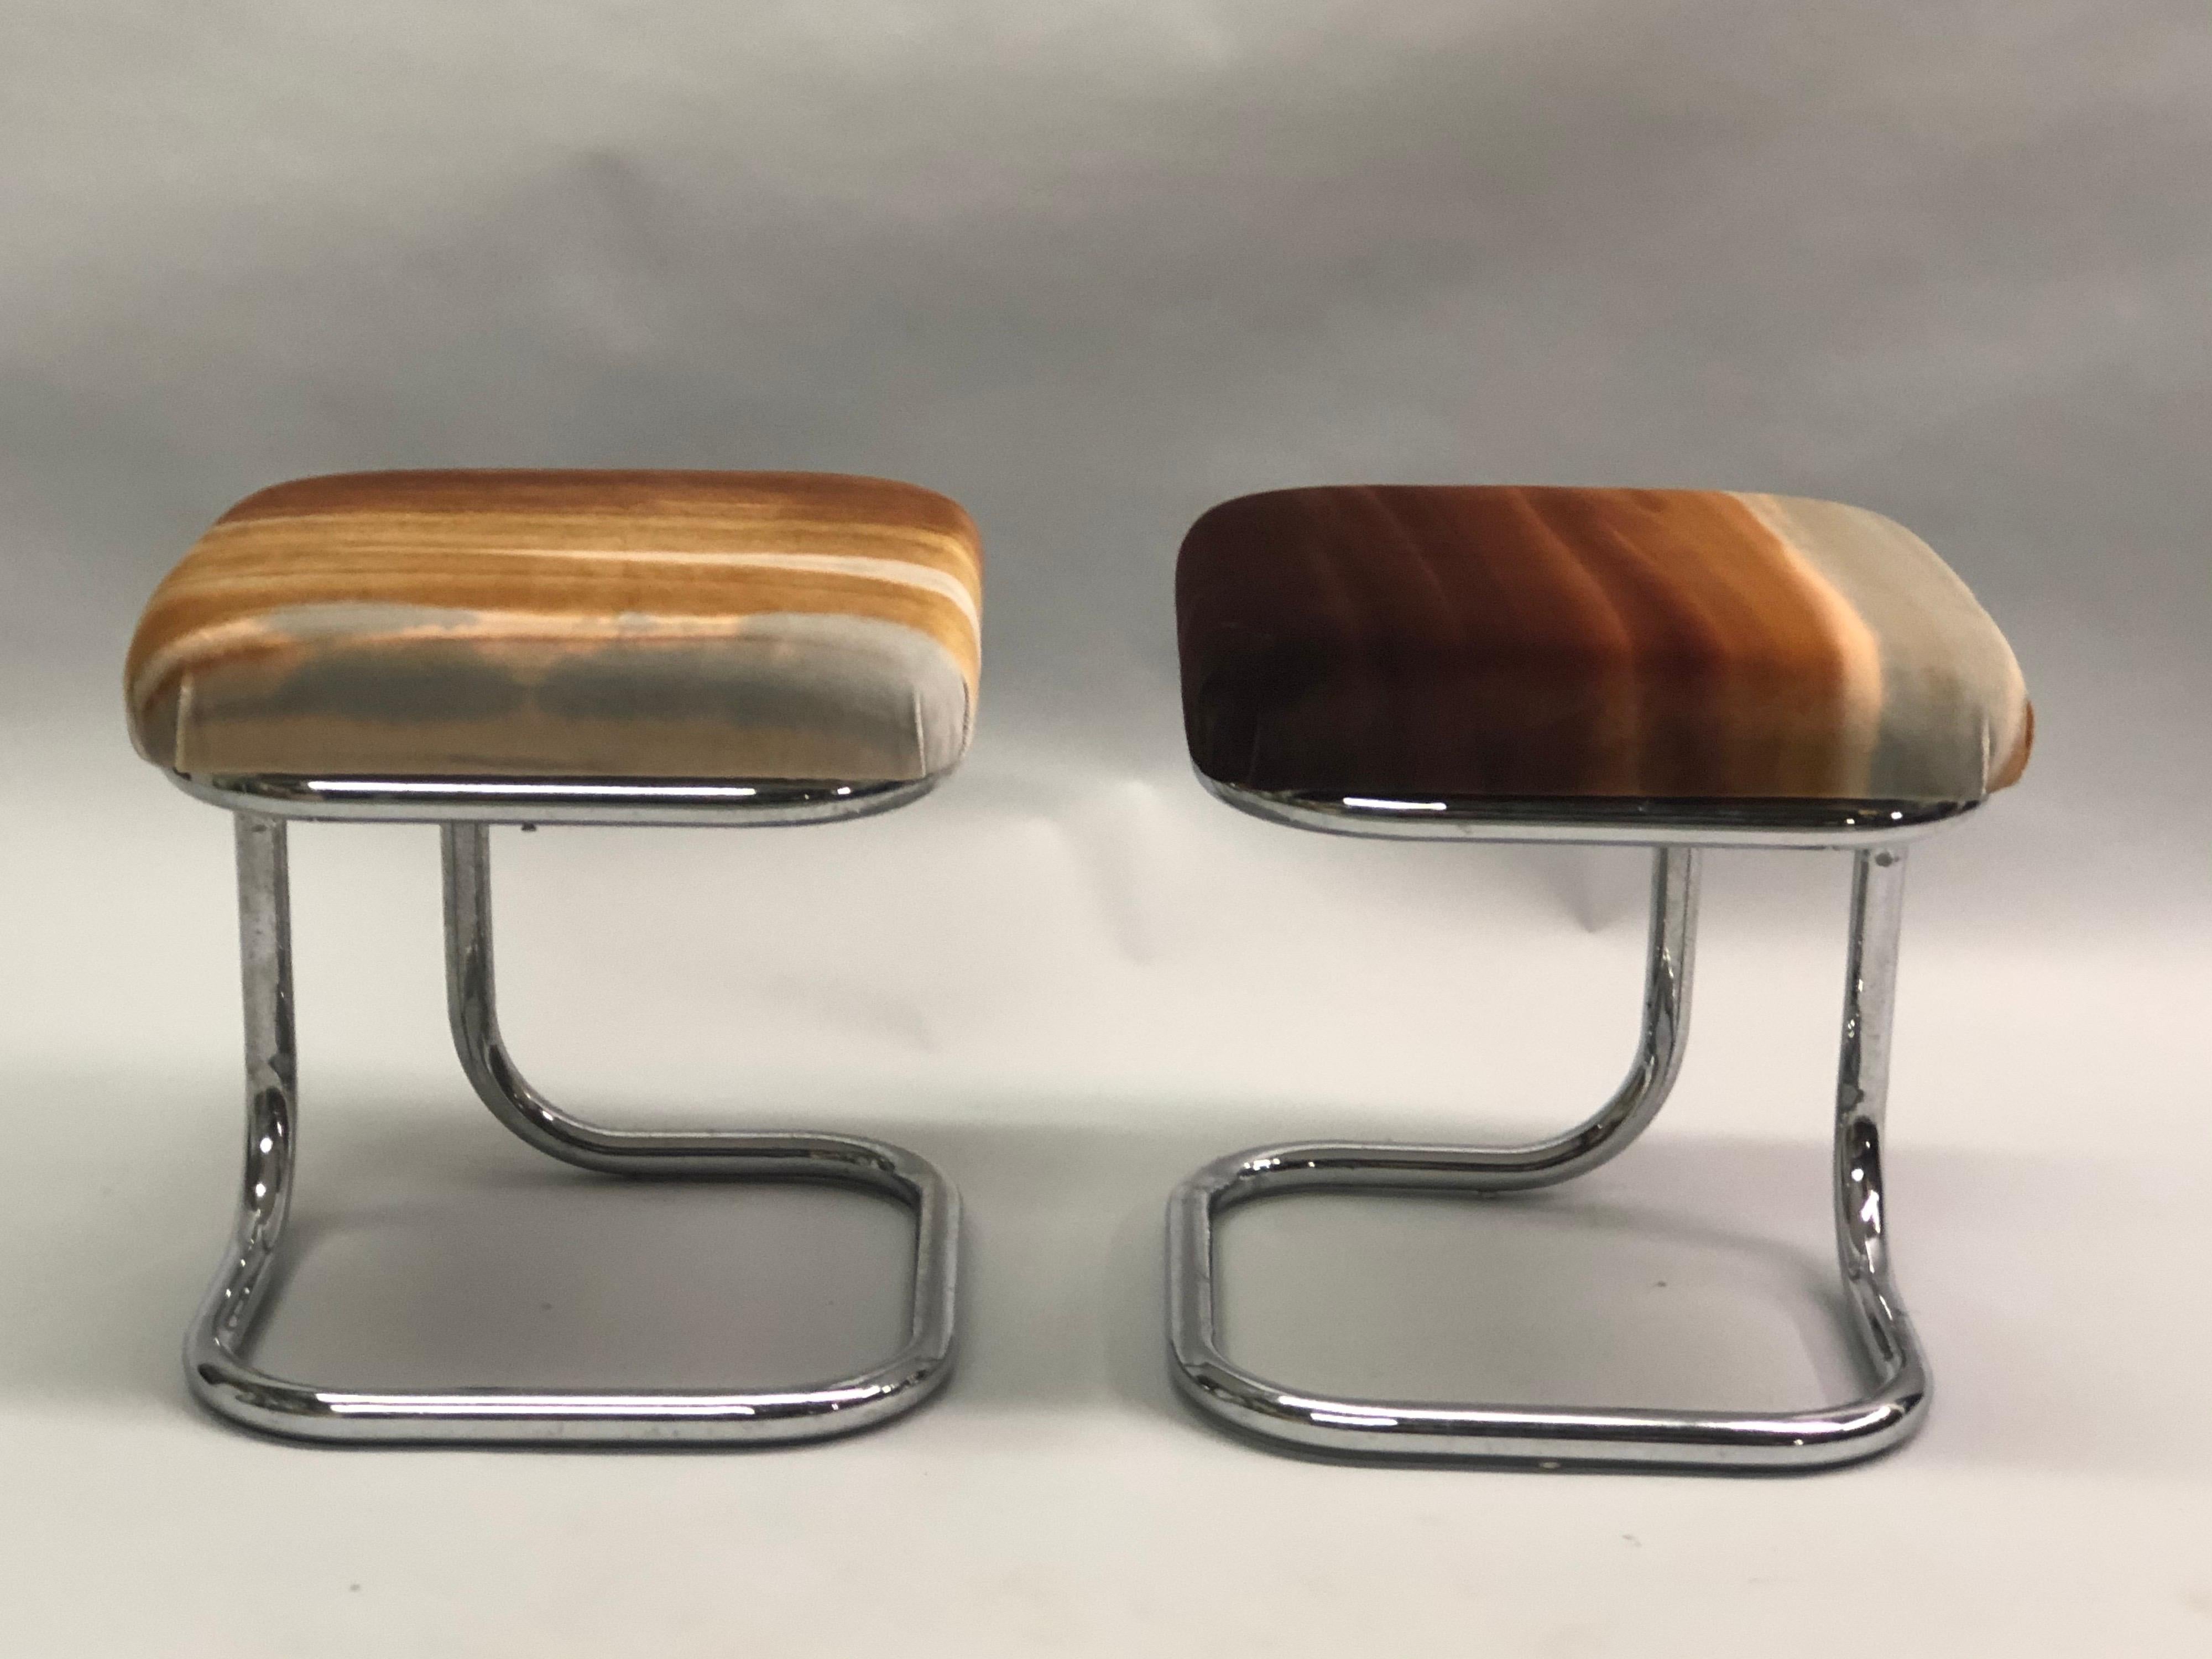 Rare and Exquisite Pair of French Mid-Century Modern Bauhaus style benches / stools fabricated with chromed tubular steel with seat fabric by Hermès. The pieces feature a rare curved tubular steel form.

References: Le Corbusier, Pierre Jeanneret,